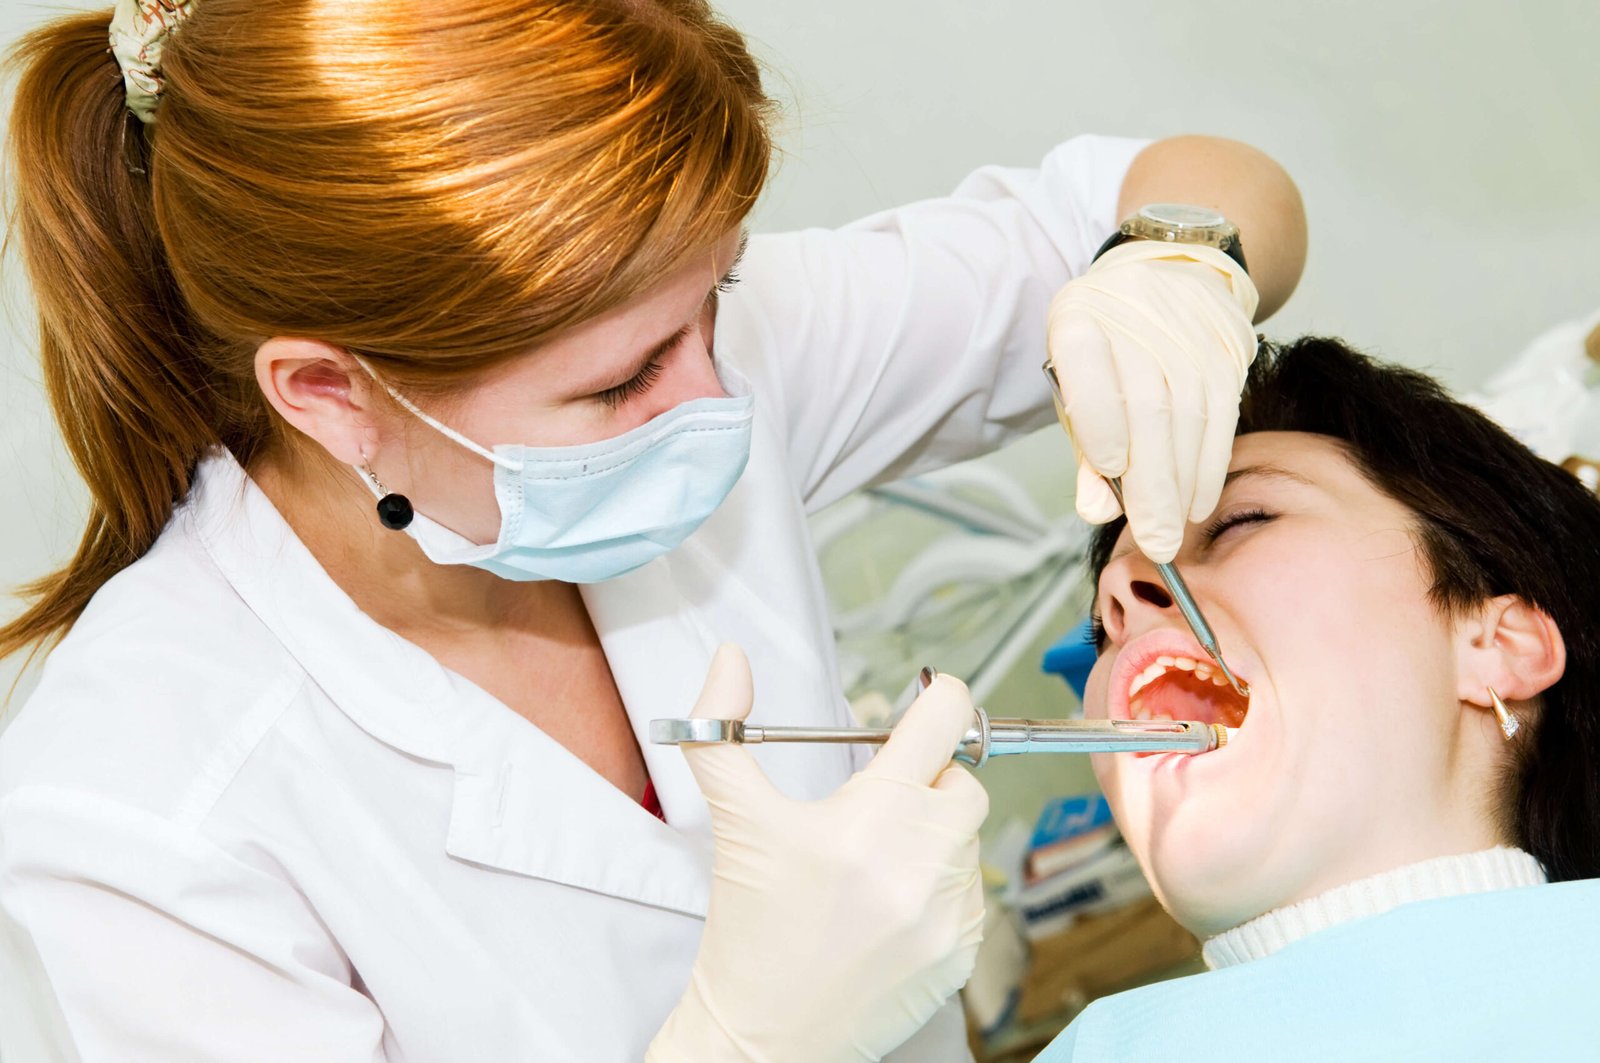 What To Look For In A Dentist If You Have Dental Phobia